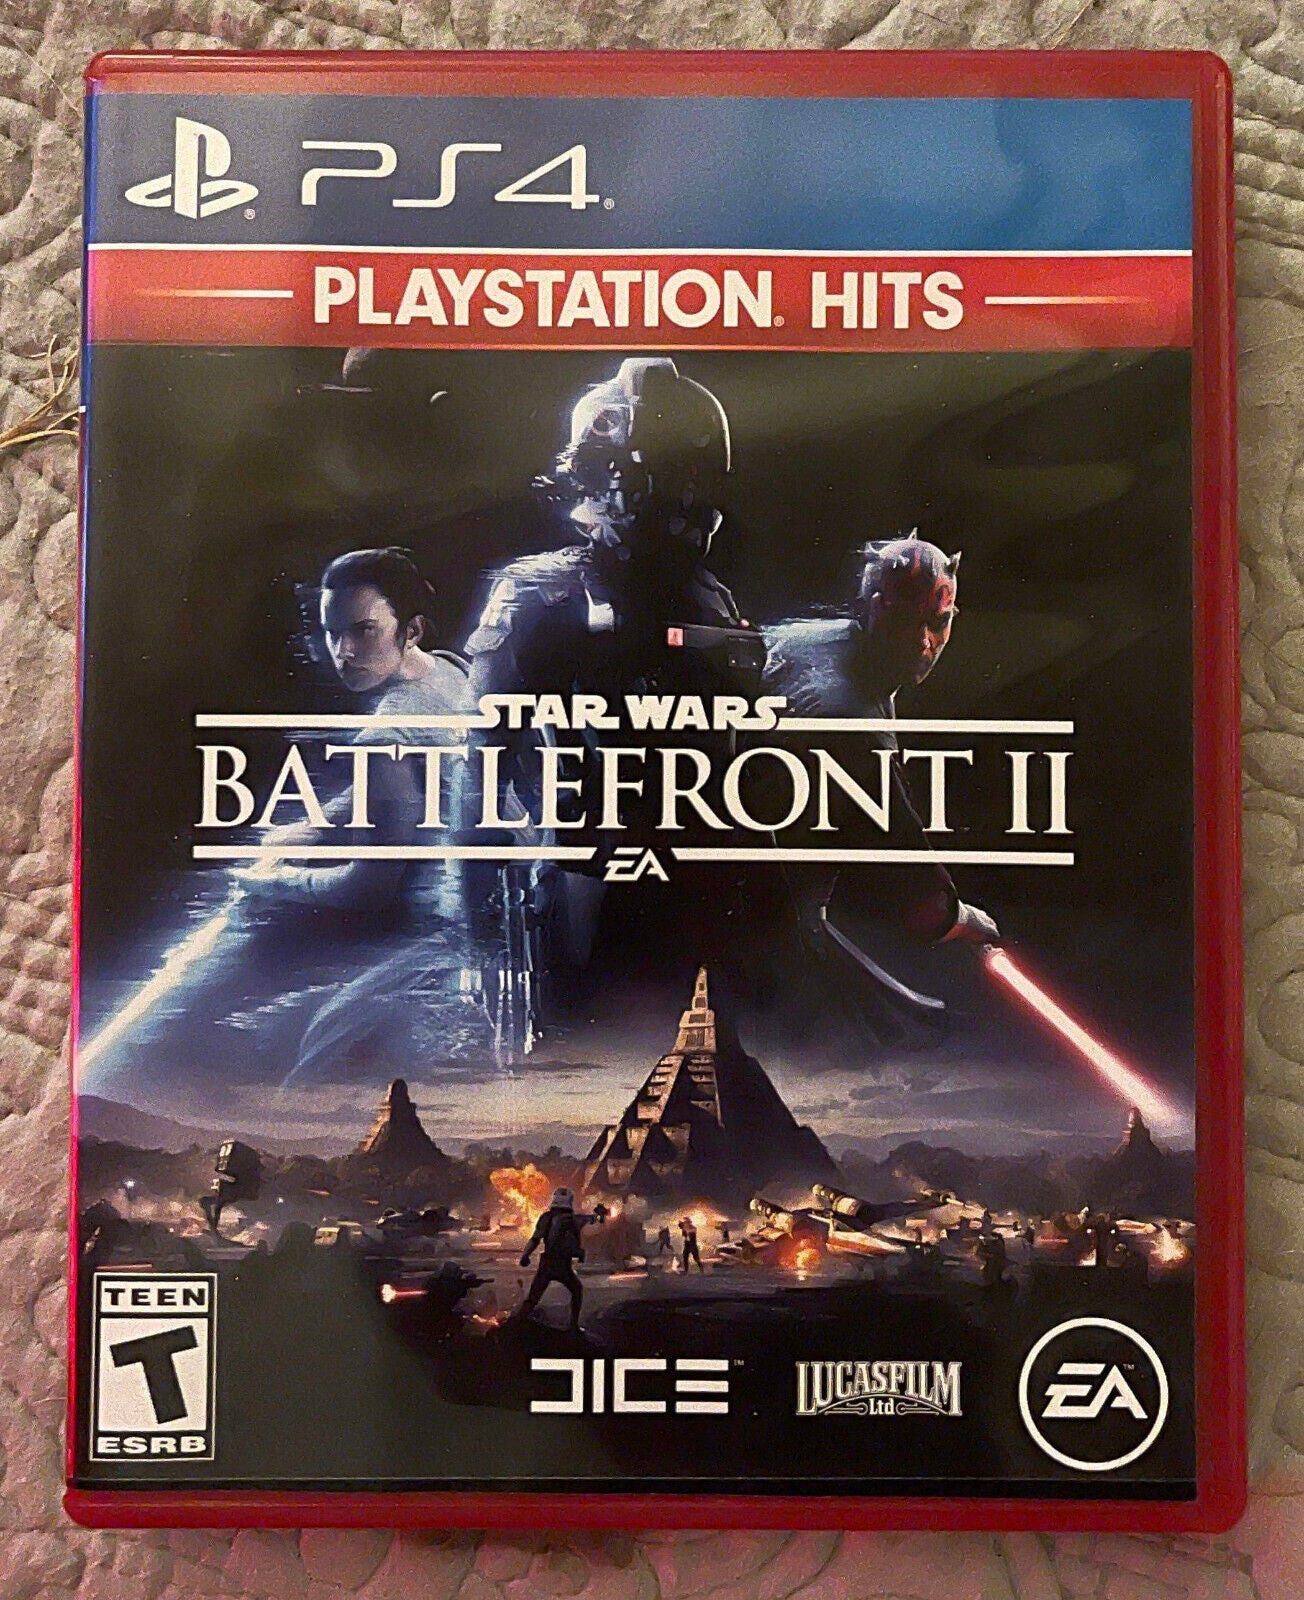 PS4 PlayStation Hits Star Wars Battlefront 2 Video Game